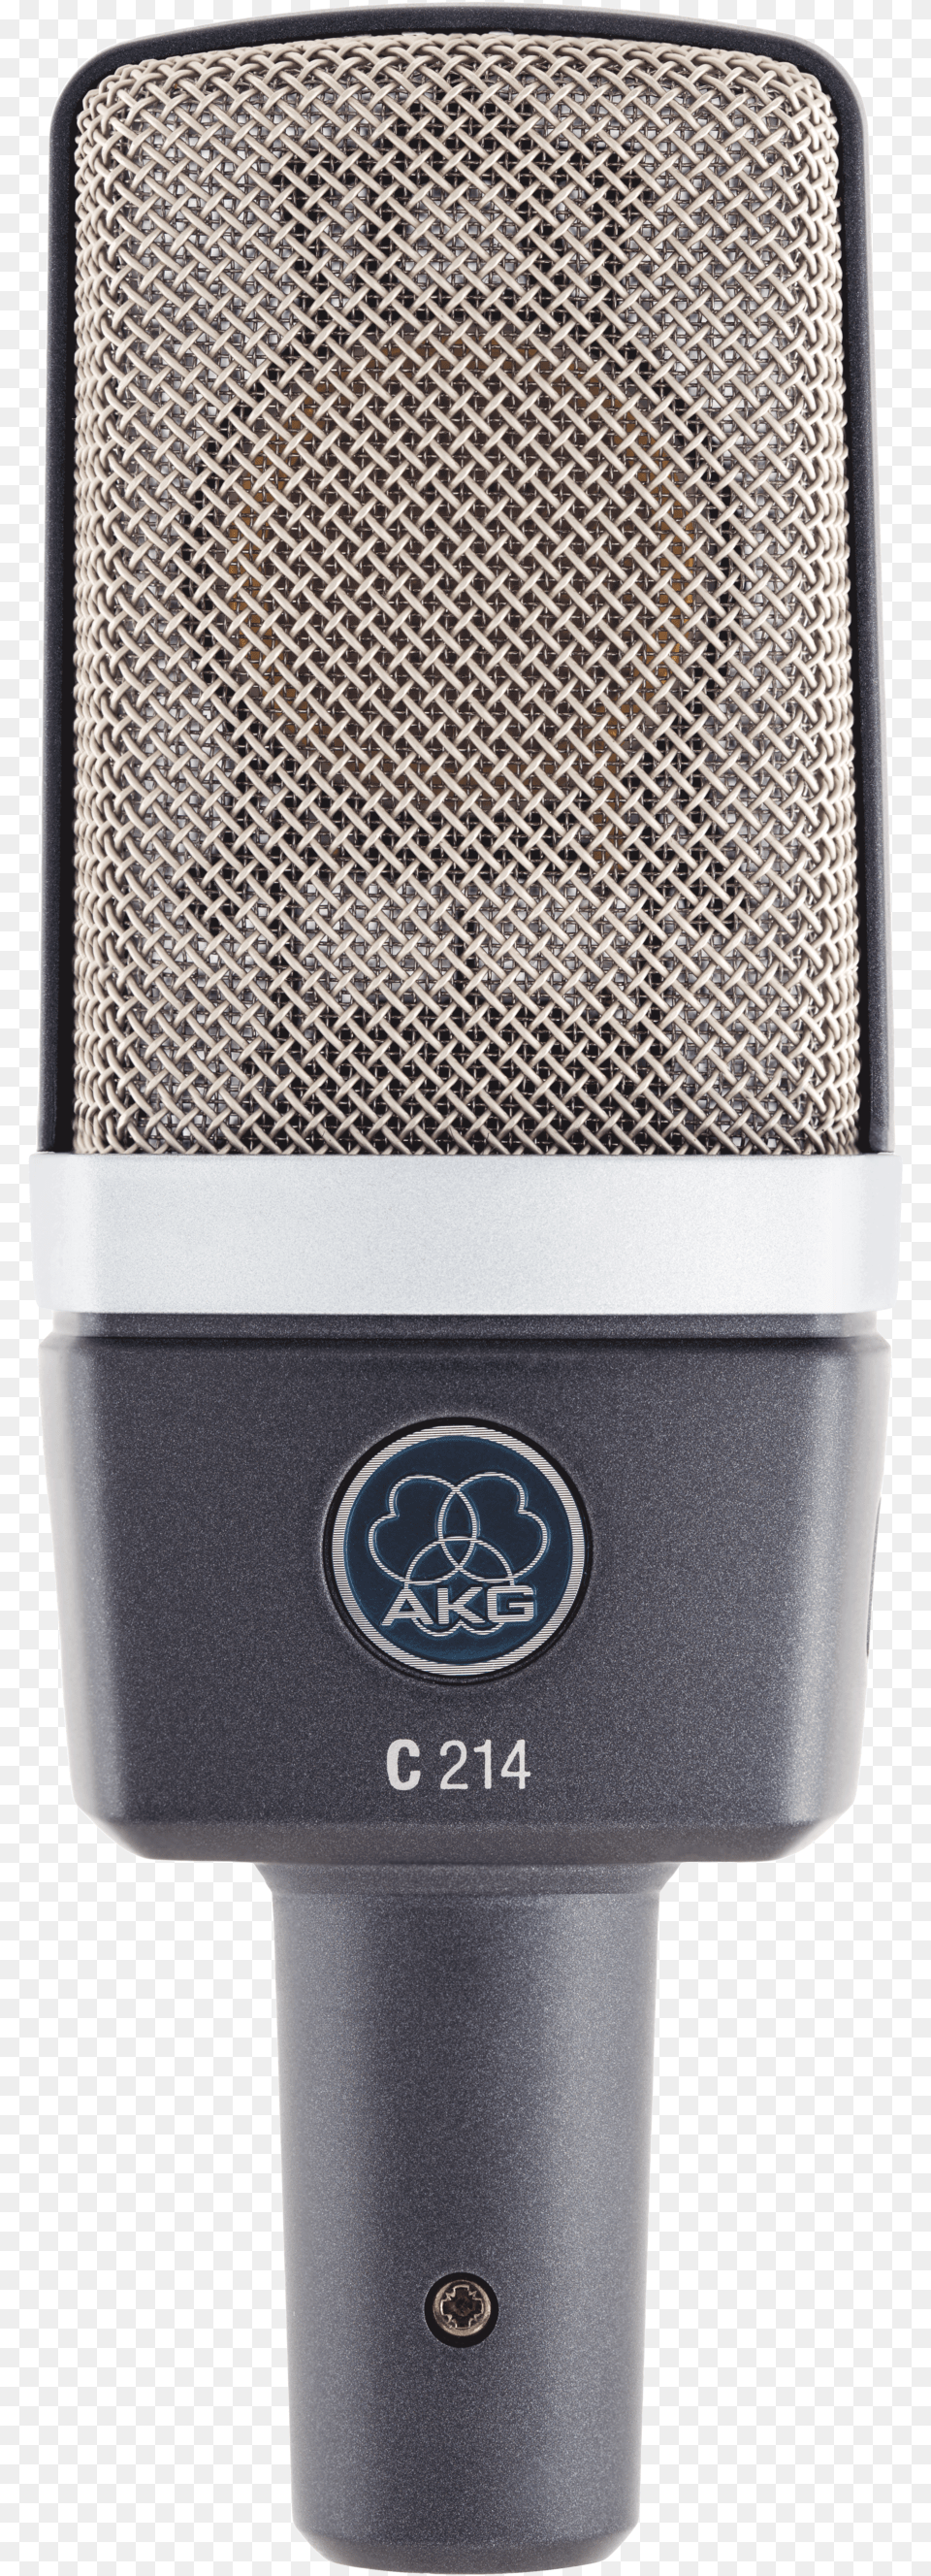 Condenser Microphone Transparent Background, Electrical Device Png Image